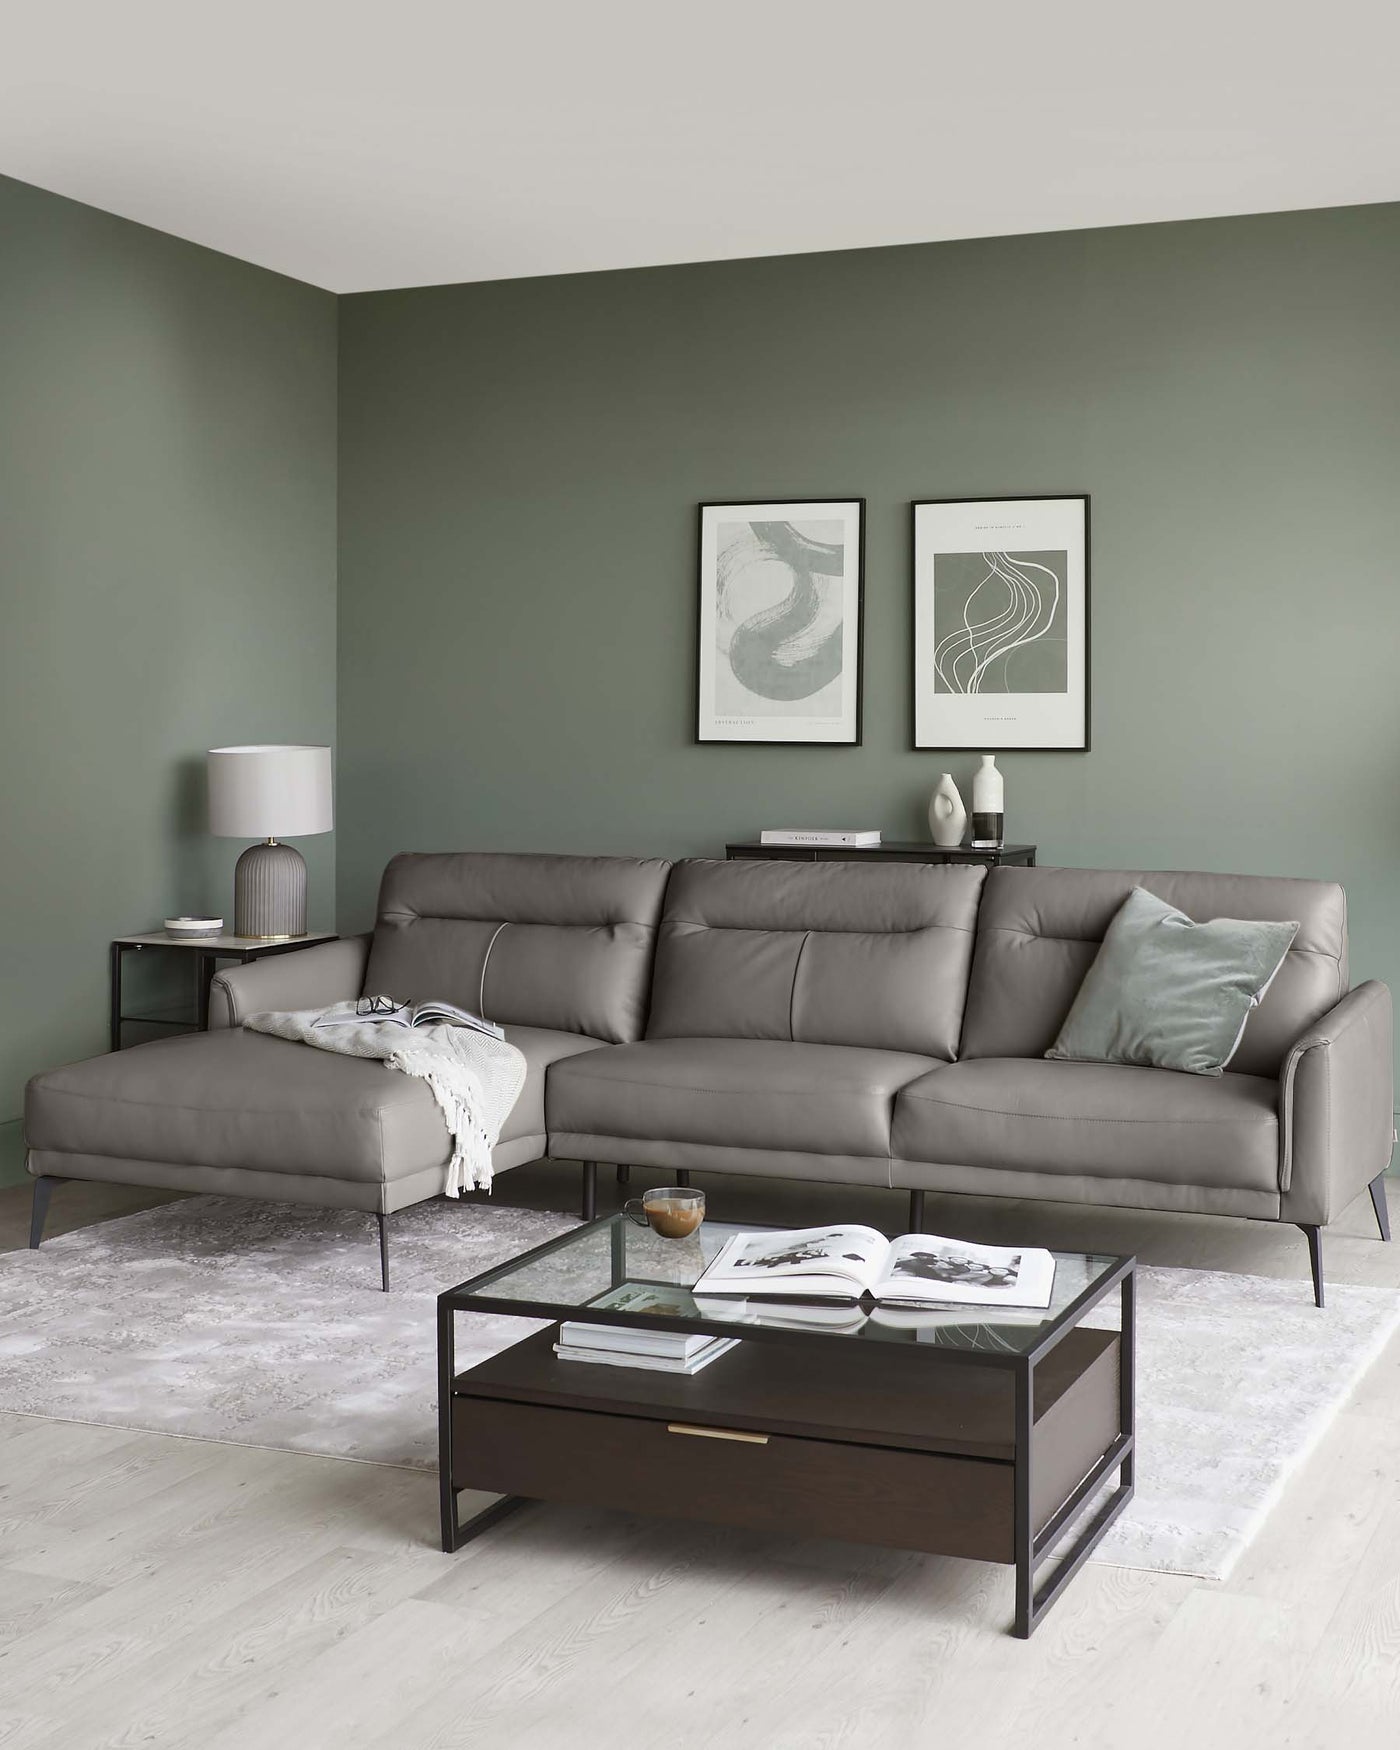 A modern living room featuring a large L-shaped sectional sofa in a muted grey upholstery, flanked by minimalist metal-frame side tables in a matching tone, accompanied by a rectangular dark wood coffee table with a glass top and metal frame. A soft white throw is casually draped over one side of the sofa, and decorative cushions accent the furniture. The room is styled with a subdued colour palette, creating a sophisticated and serene setting.